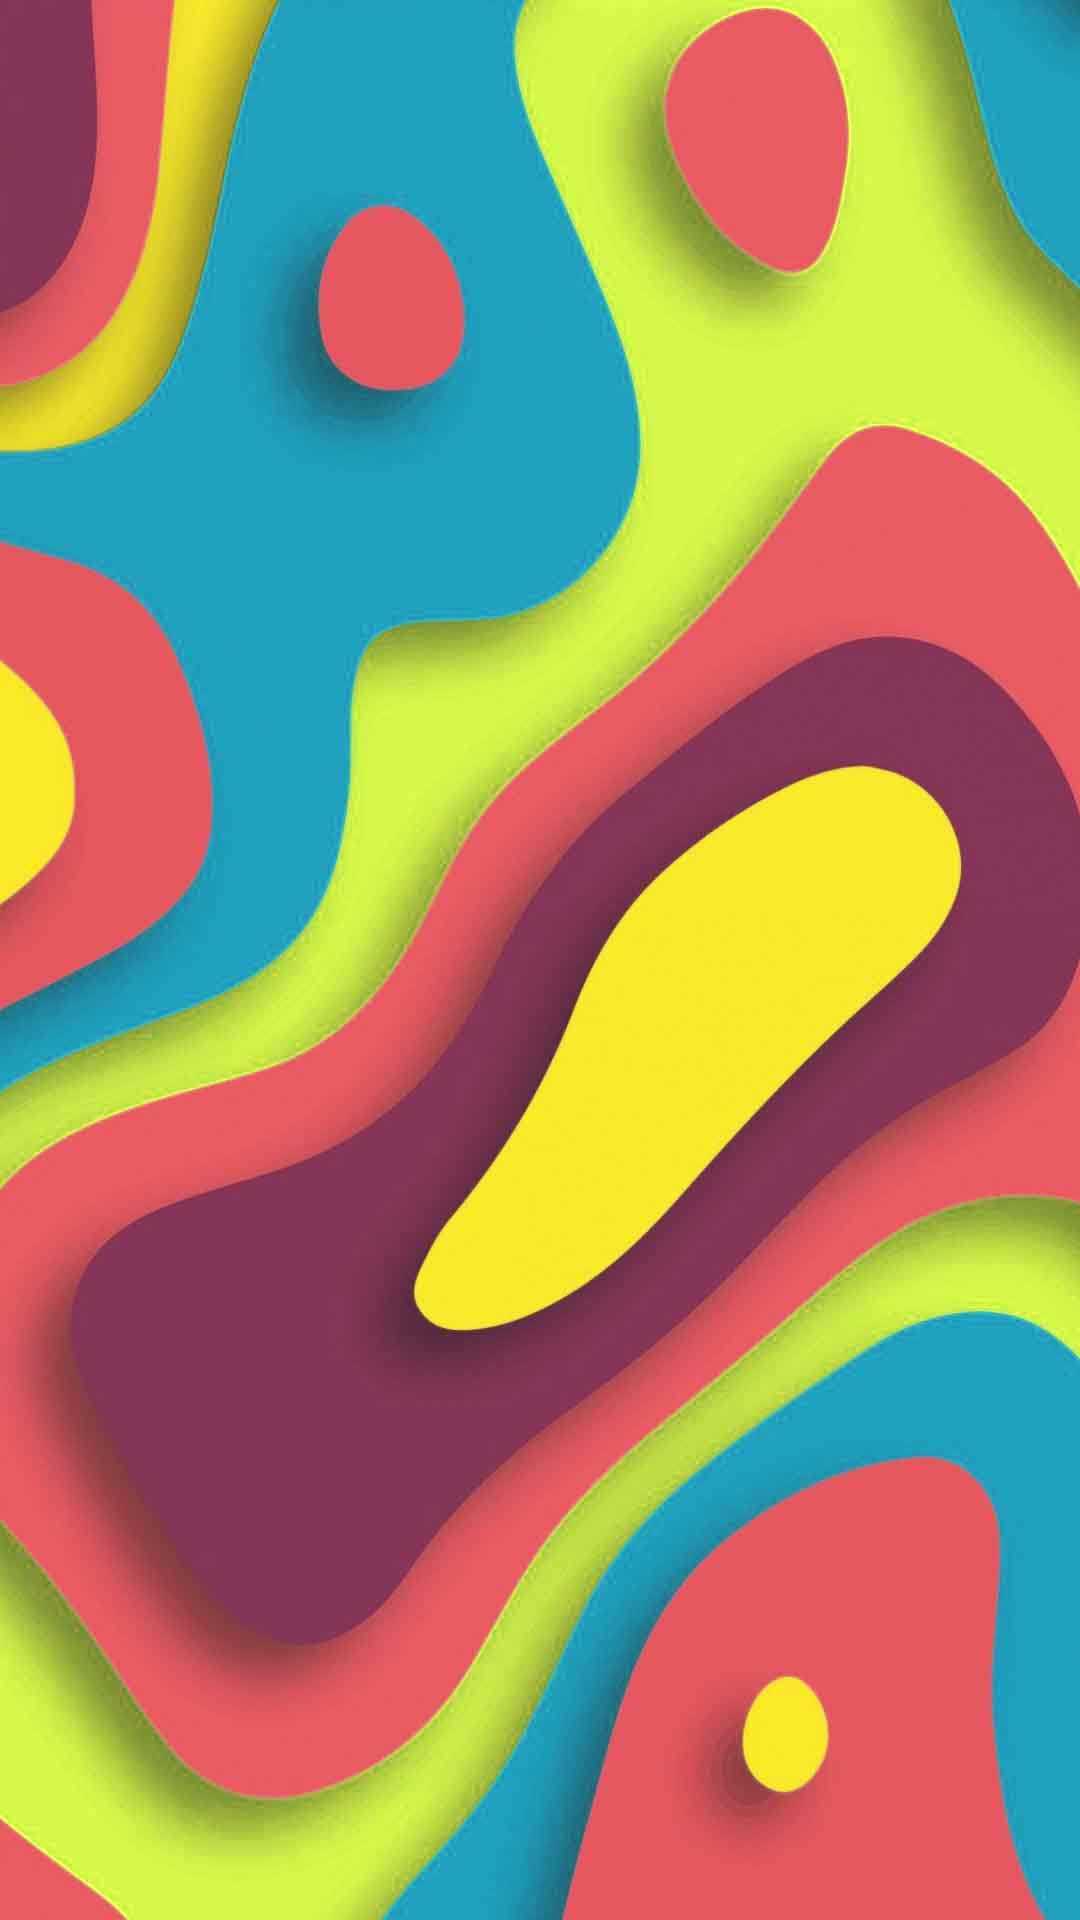 Colorful Wallpaper - KoLPaPer - Awesome Free HD Wallpapers